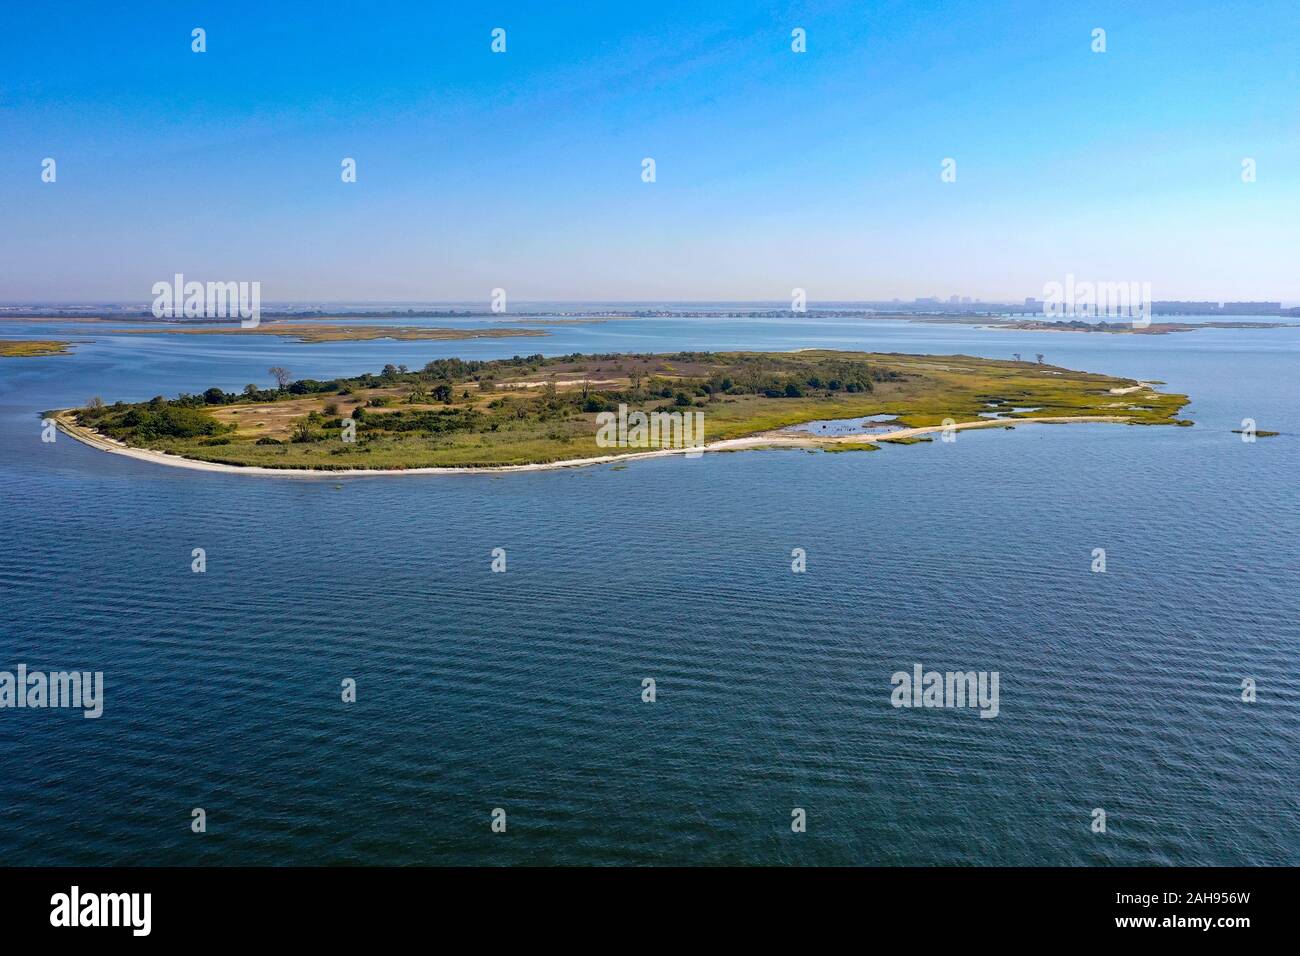 Ruffle Bar, a 143-acre (58 ha) island located in Jamaica Bay in the borough of Brooklyn in New York City, off the coast of Canarsie. Stock Photo